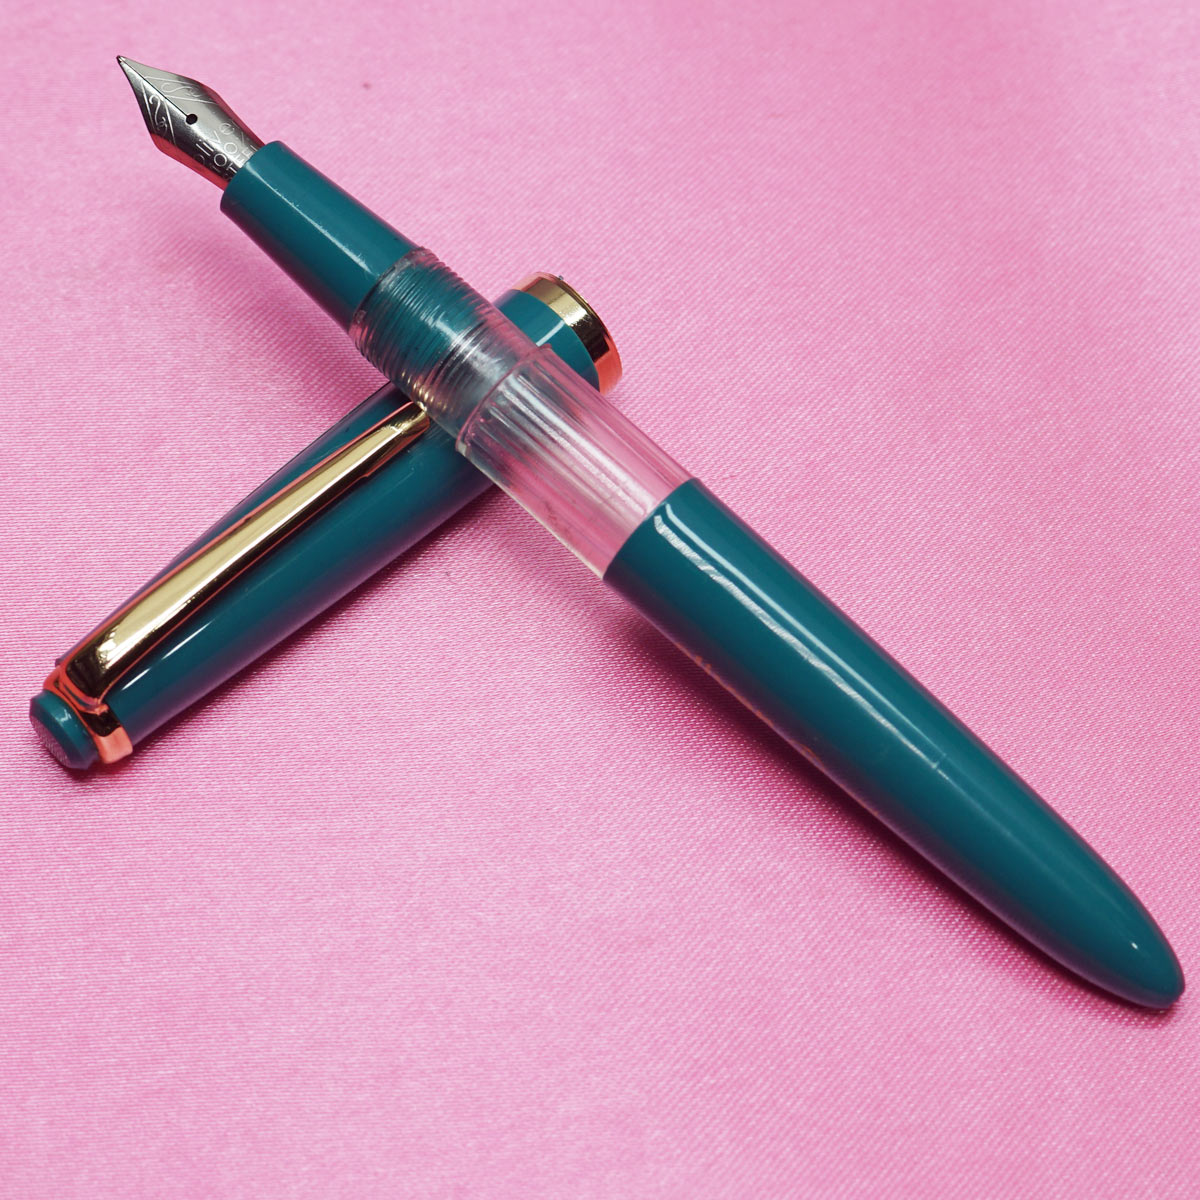 Oliver 11 Turquoise Blue Color Pattern Window Design Body With Gold Clip Fine Nib Eyedropper Type Fountain Pen SKU 22125